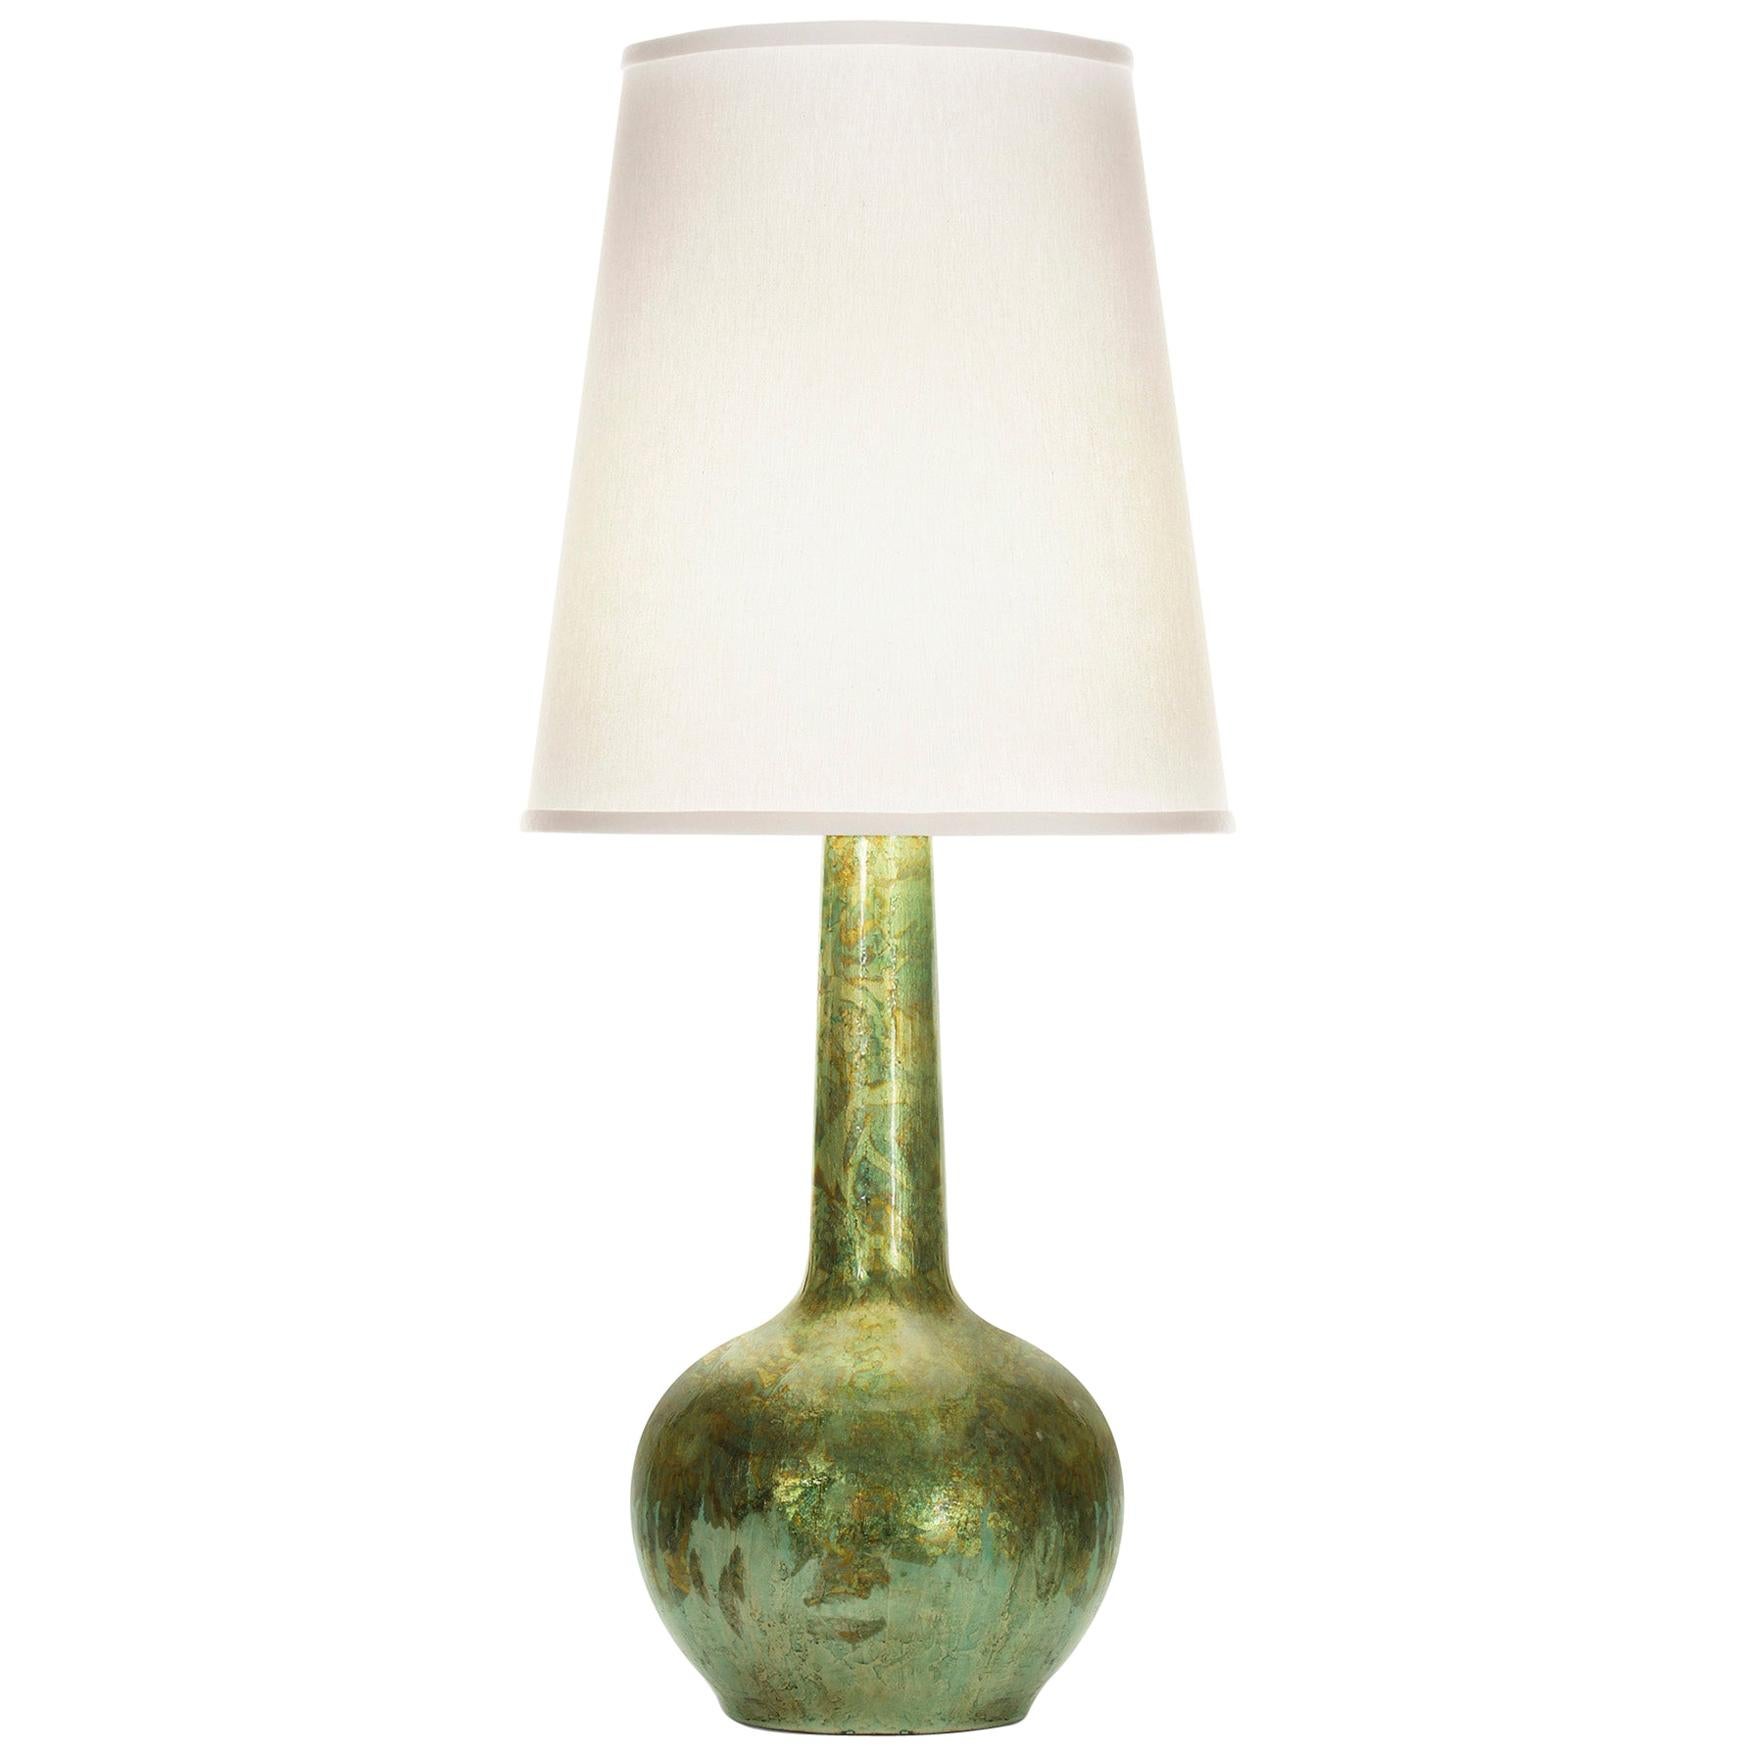 Owen Table Lamp in Antique Green Ceramic by CuratedKravet